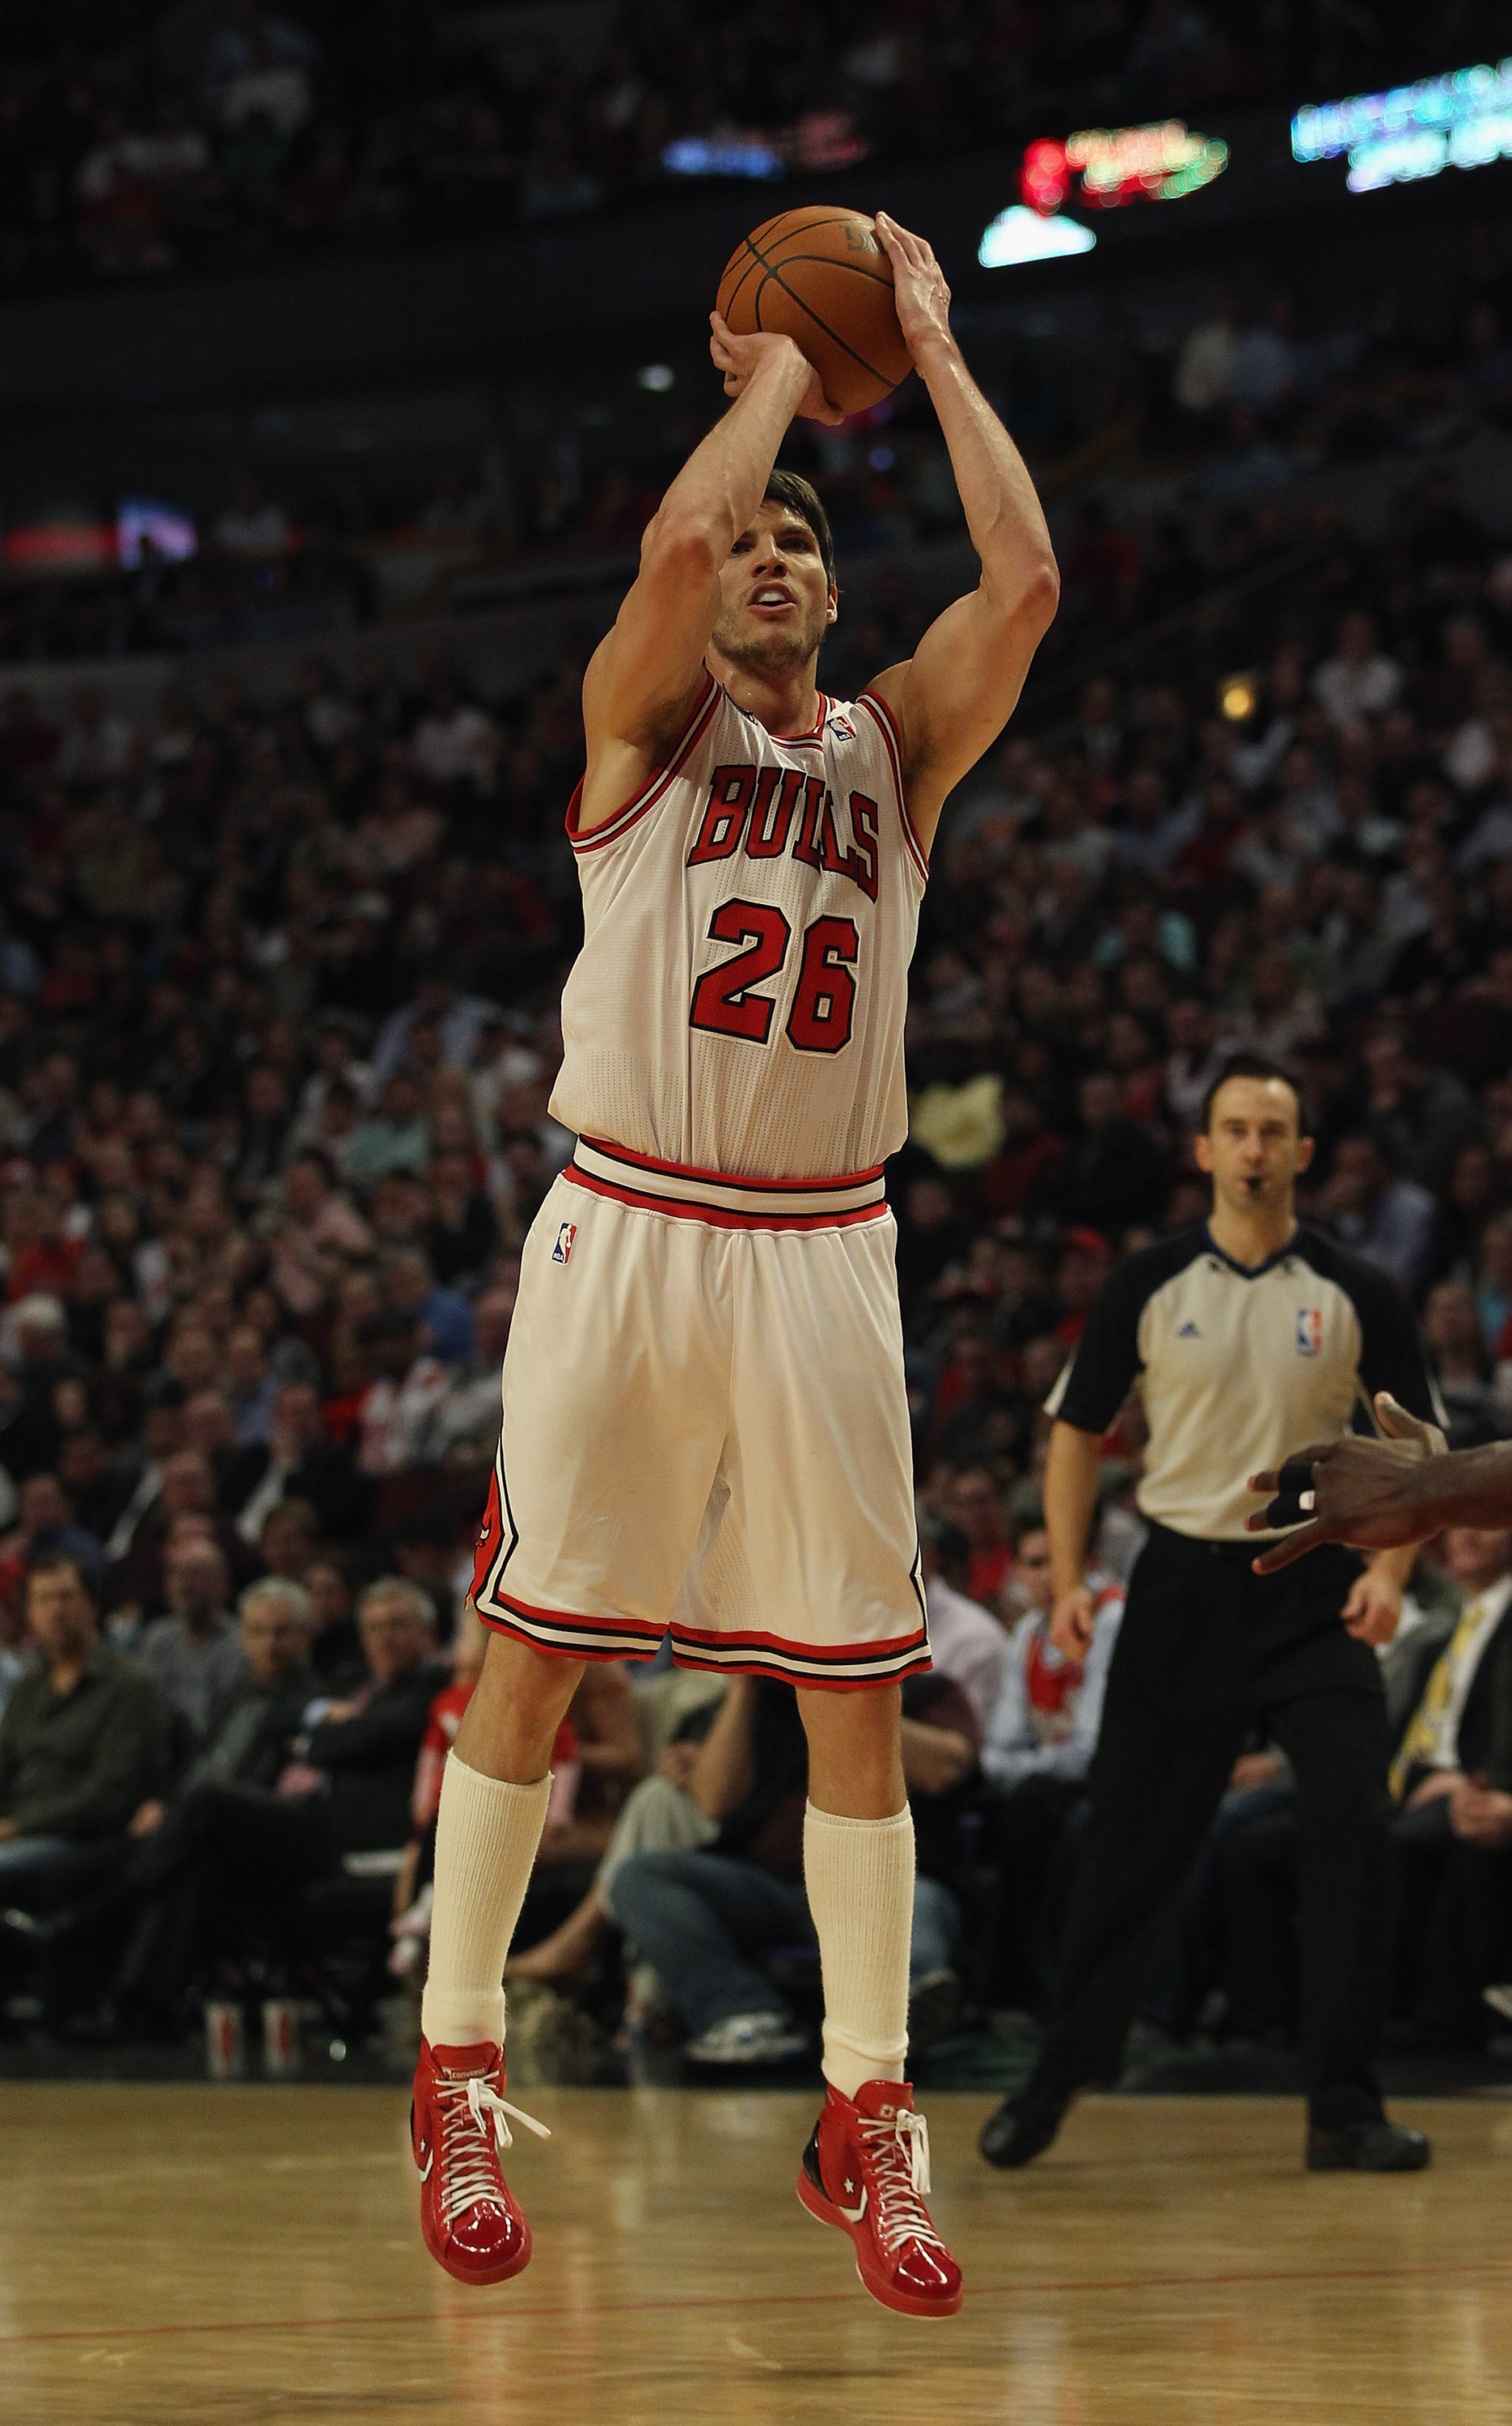 CHICAGO, IL - APRIL 13: Kyle Korver #26 of the Chicago Bulls puts up a shot on his way to 19 points against the New Jersey Nets at the United Center on April 13, 2011 in Chicago, Illinois. The Bulls defeated the Nets 97-92. NOTE TO USER: User expressly ac